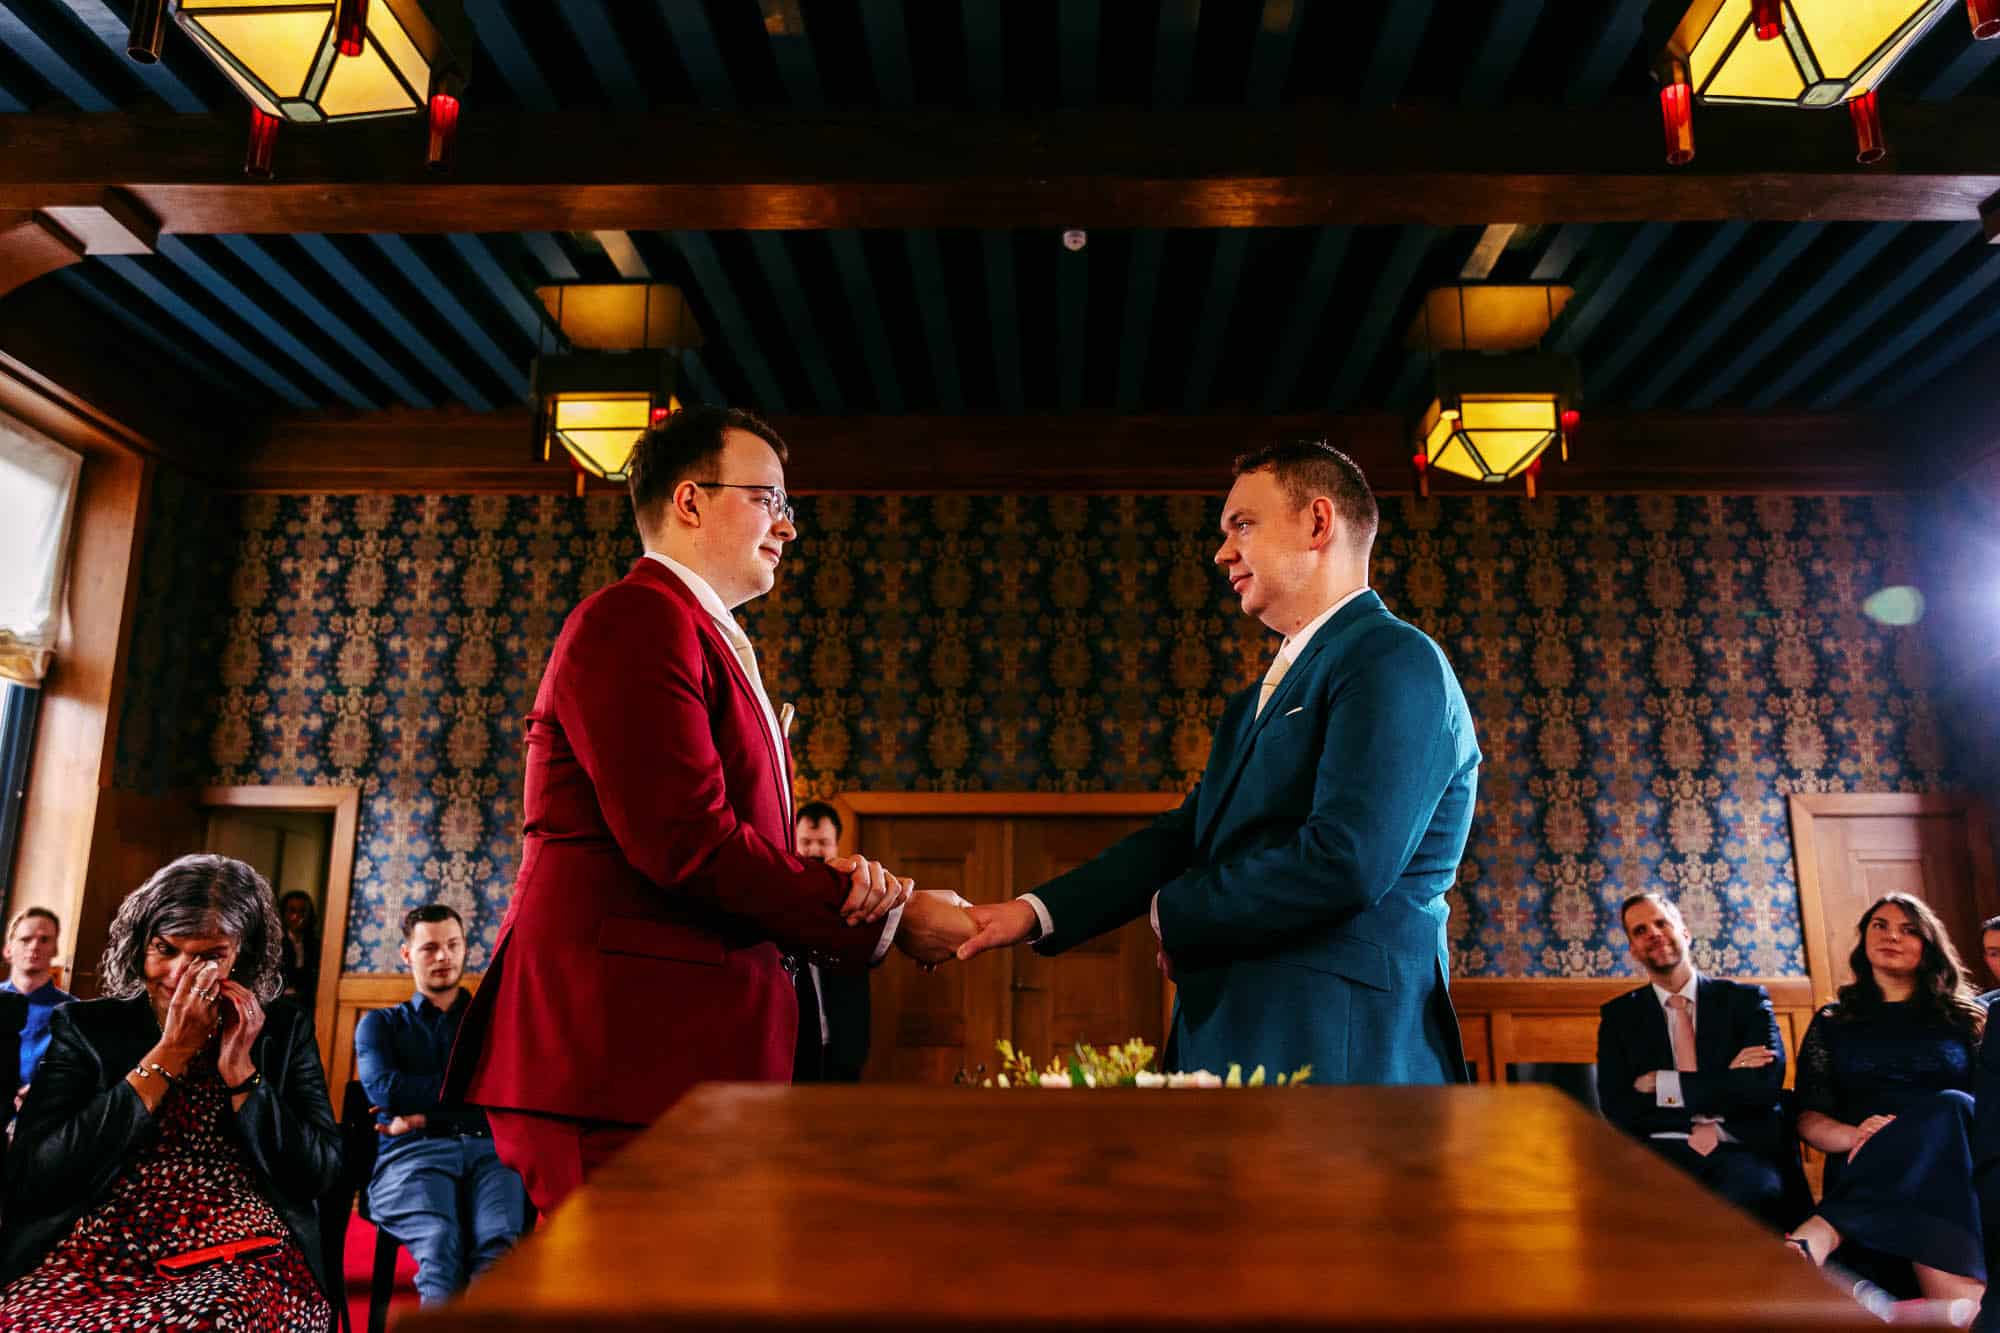 Two men shake hands during a wedding ceremony and celebrate the history of marriage.